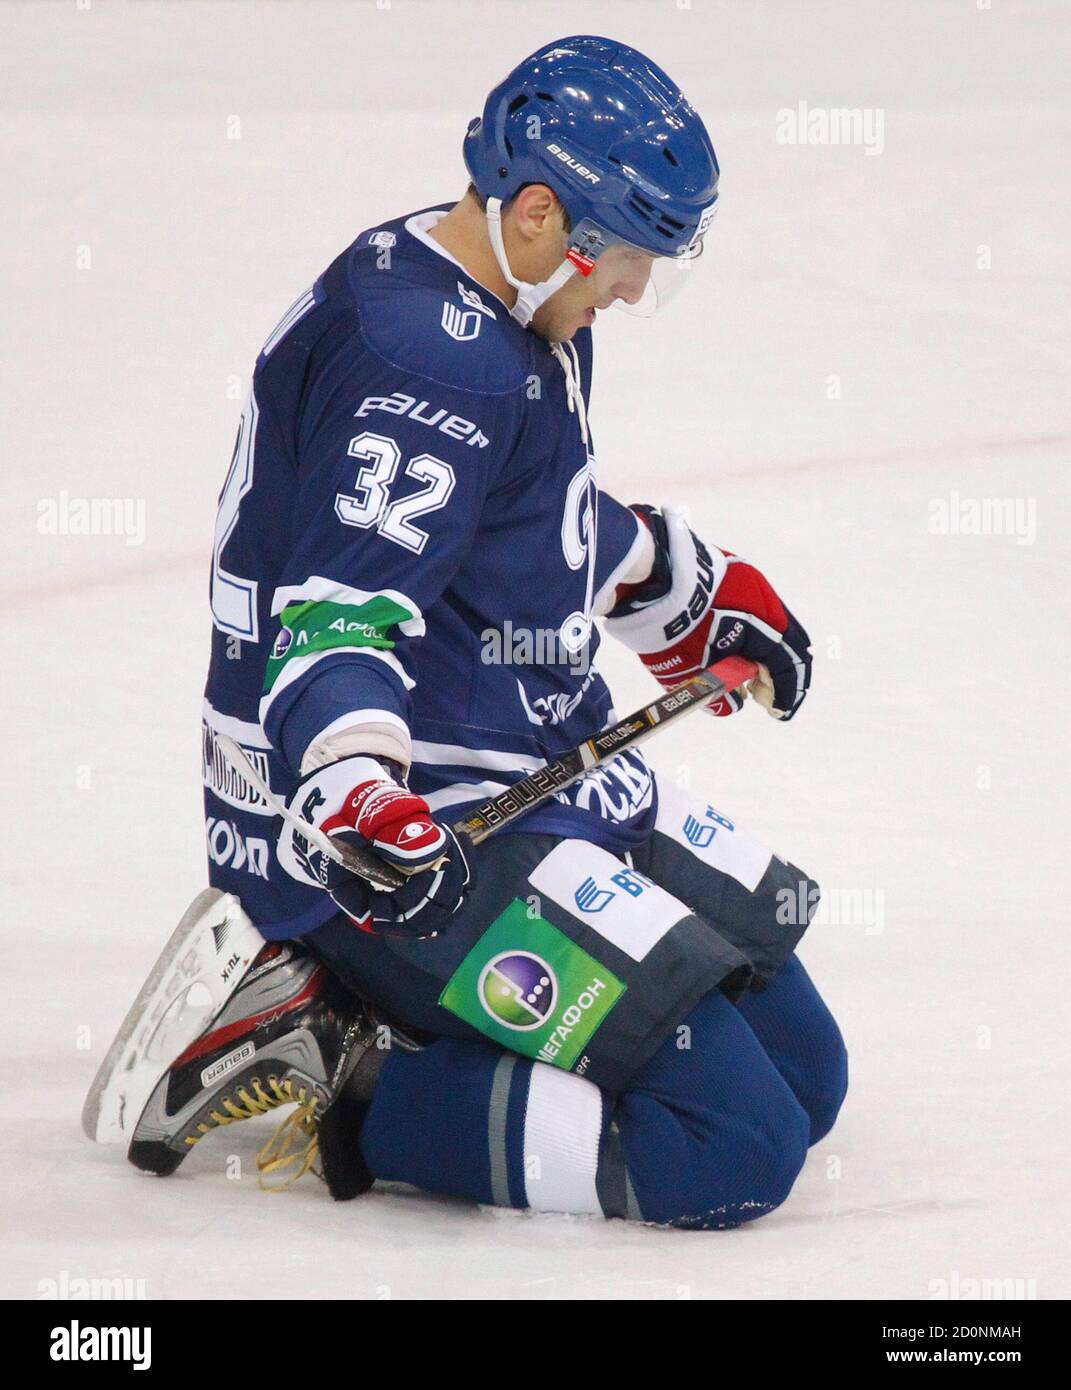 Dynamo Moscow's Alexander Ovechkin kneels down on the ice during their  Kontinental Hockey League (KHL) game against SKA St. Petersburg in Moscow  September 23, 2012. Alexander Ovechkin has become the latest high-profile